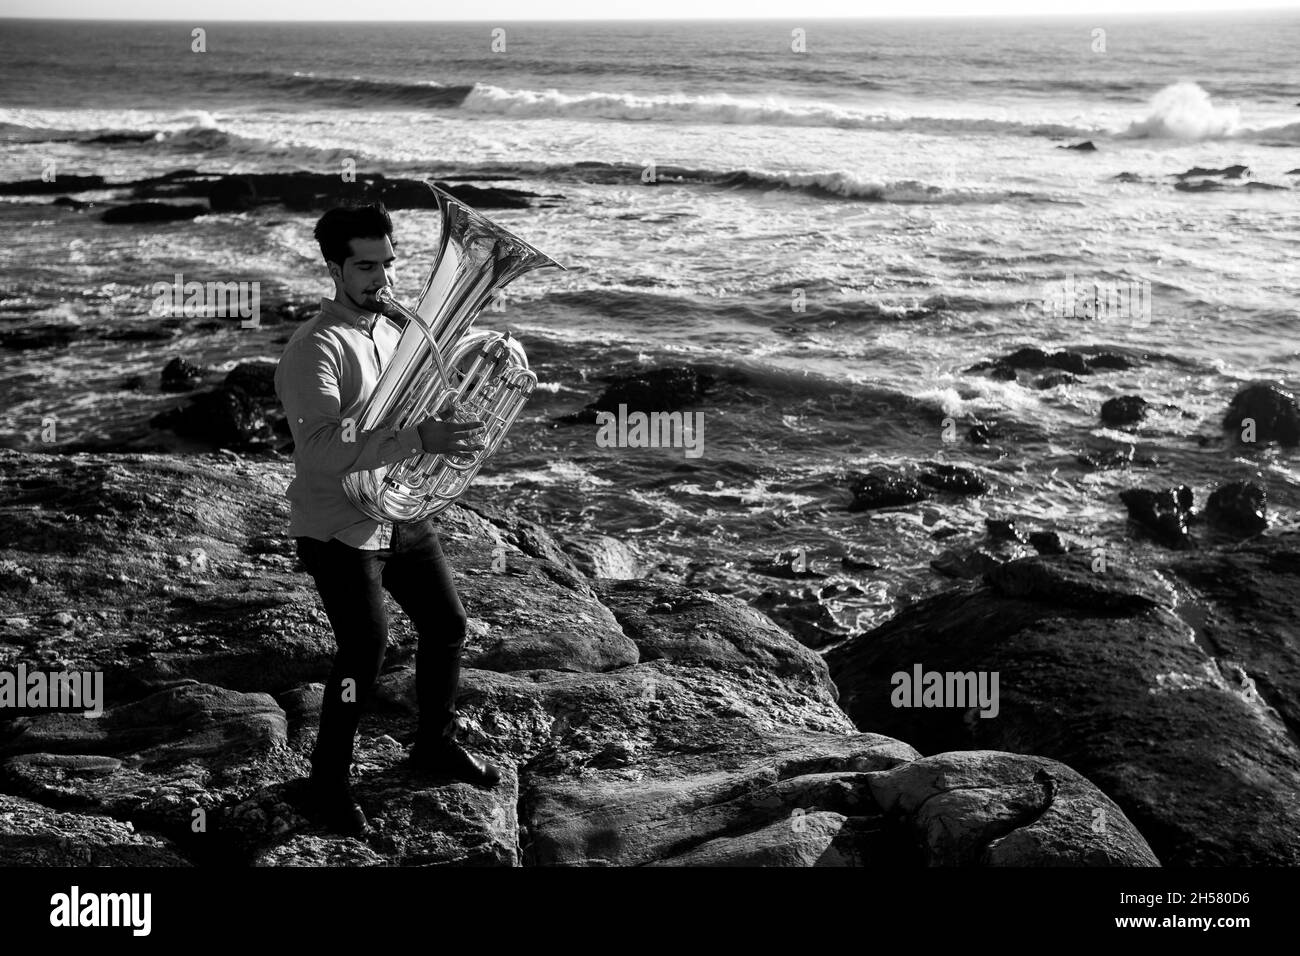 A musician man with a tuba on the Ocean beach. Black and white photo. Stock Photo